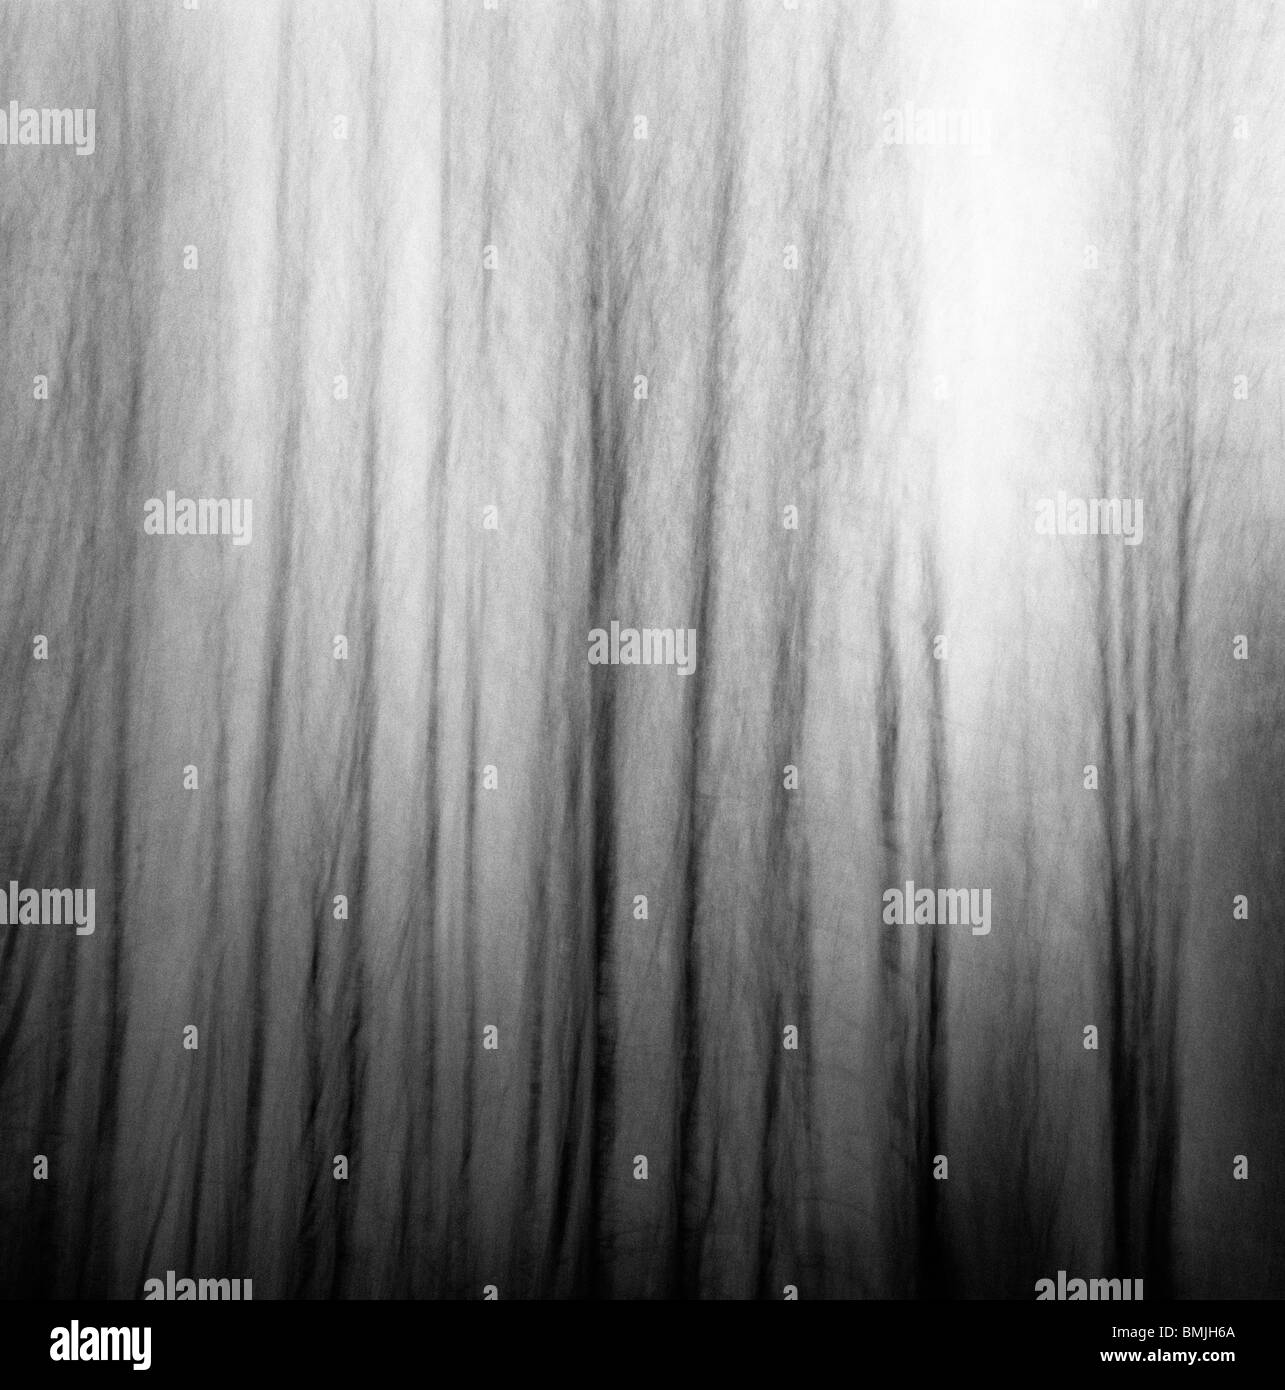 Trees in forest, blurred motion Stock Photo